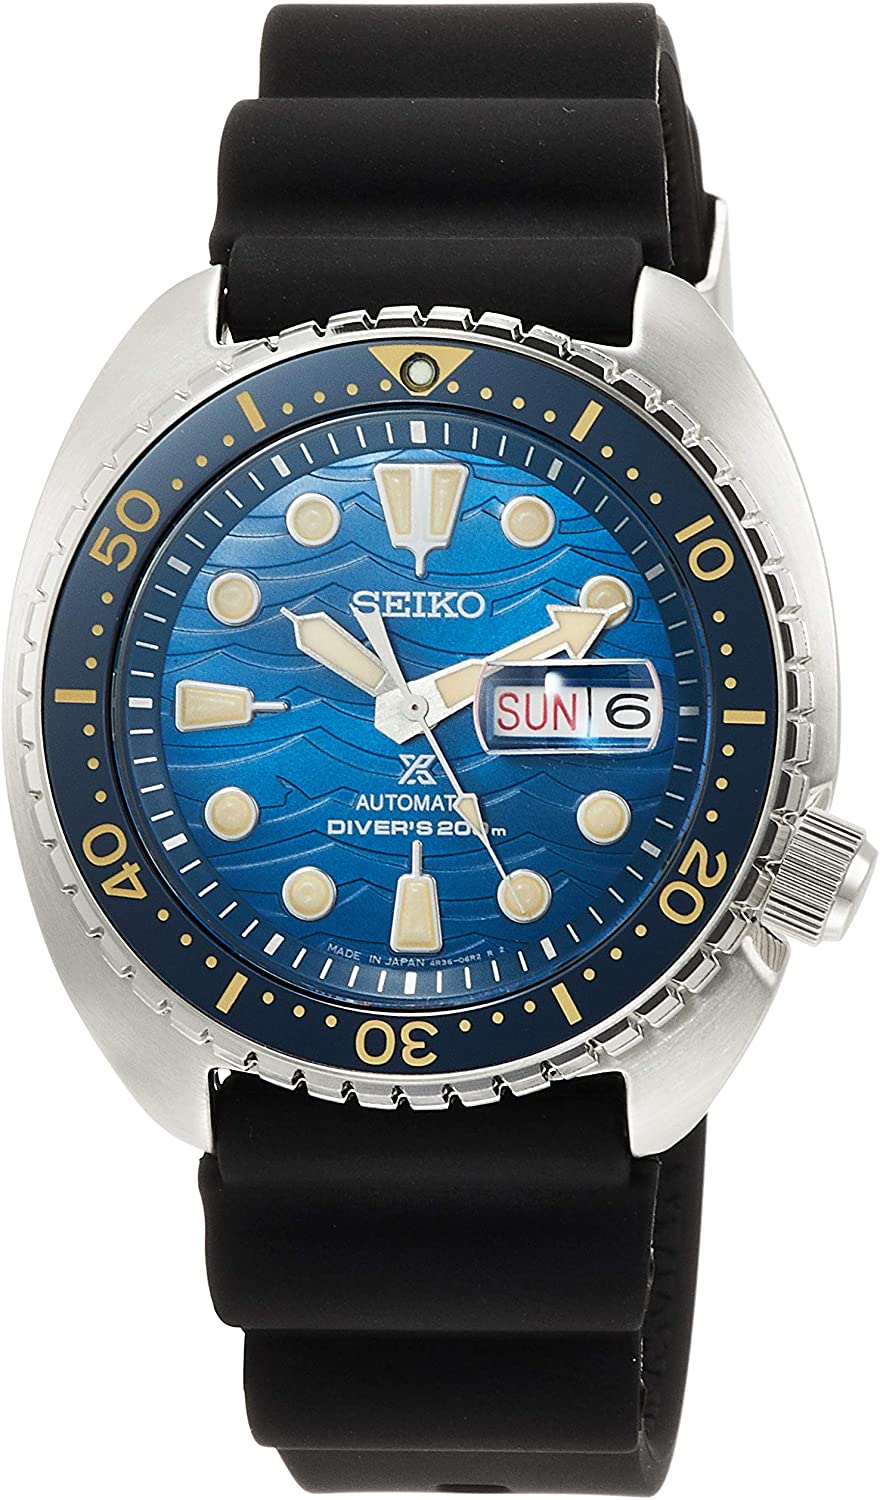 King Turtle Save The Ocean - Great White Shark - The Seiko Guy